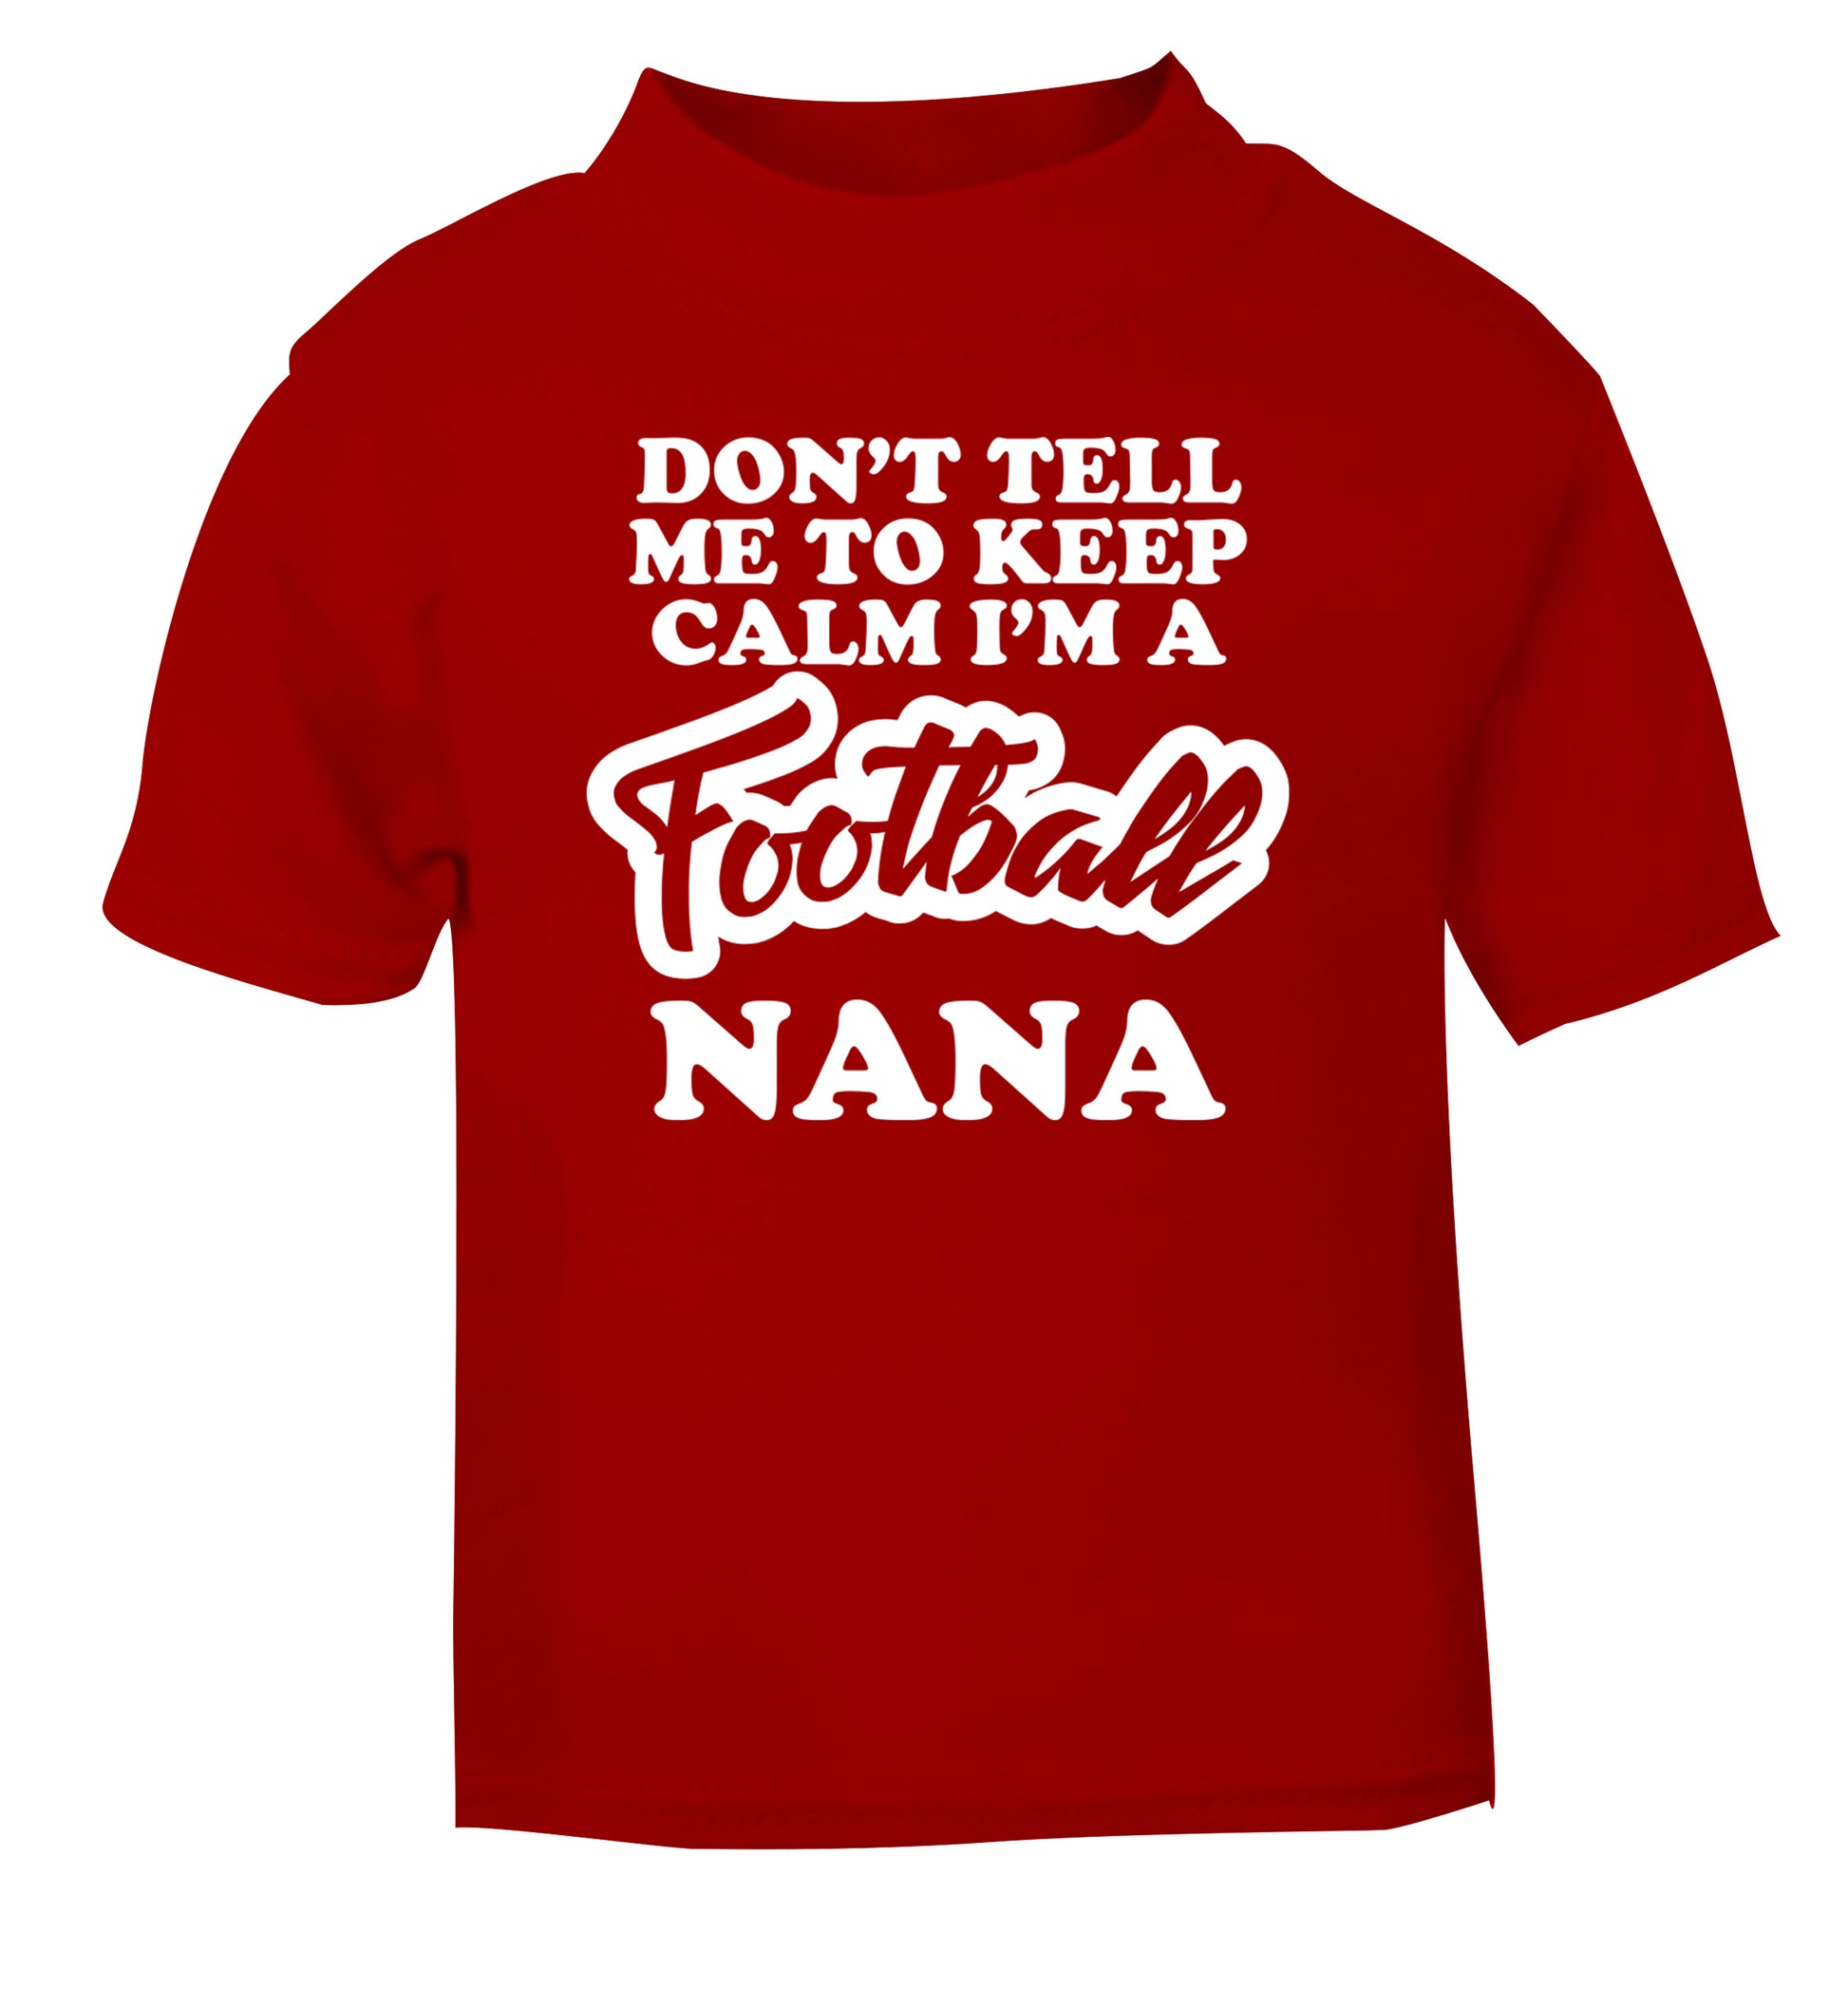 Don't tell me to keep calm I'm a football nana red Baby Toddler Tshirt 2 Years